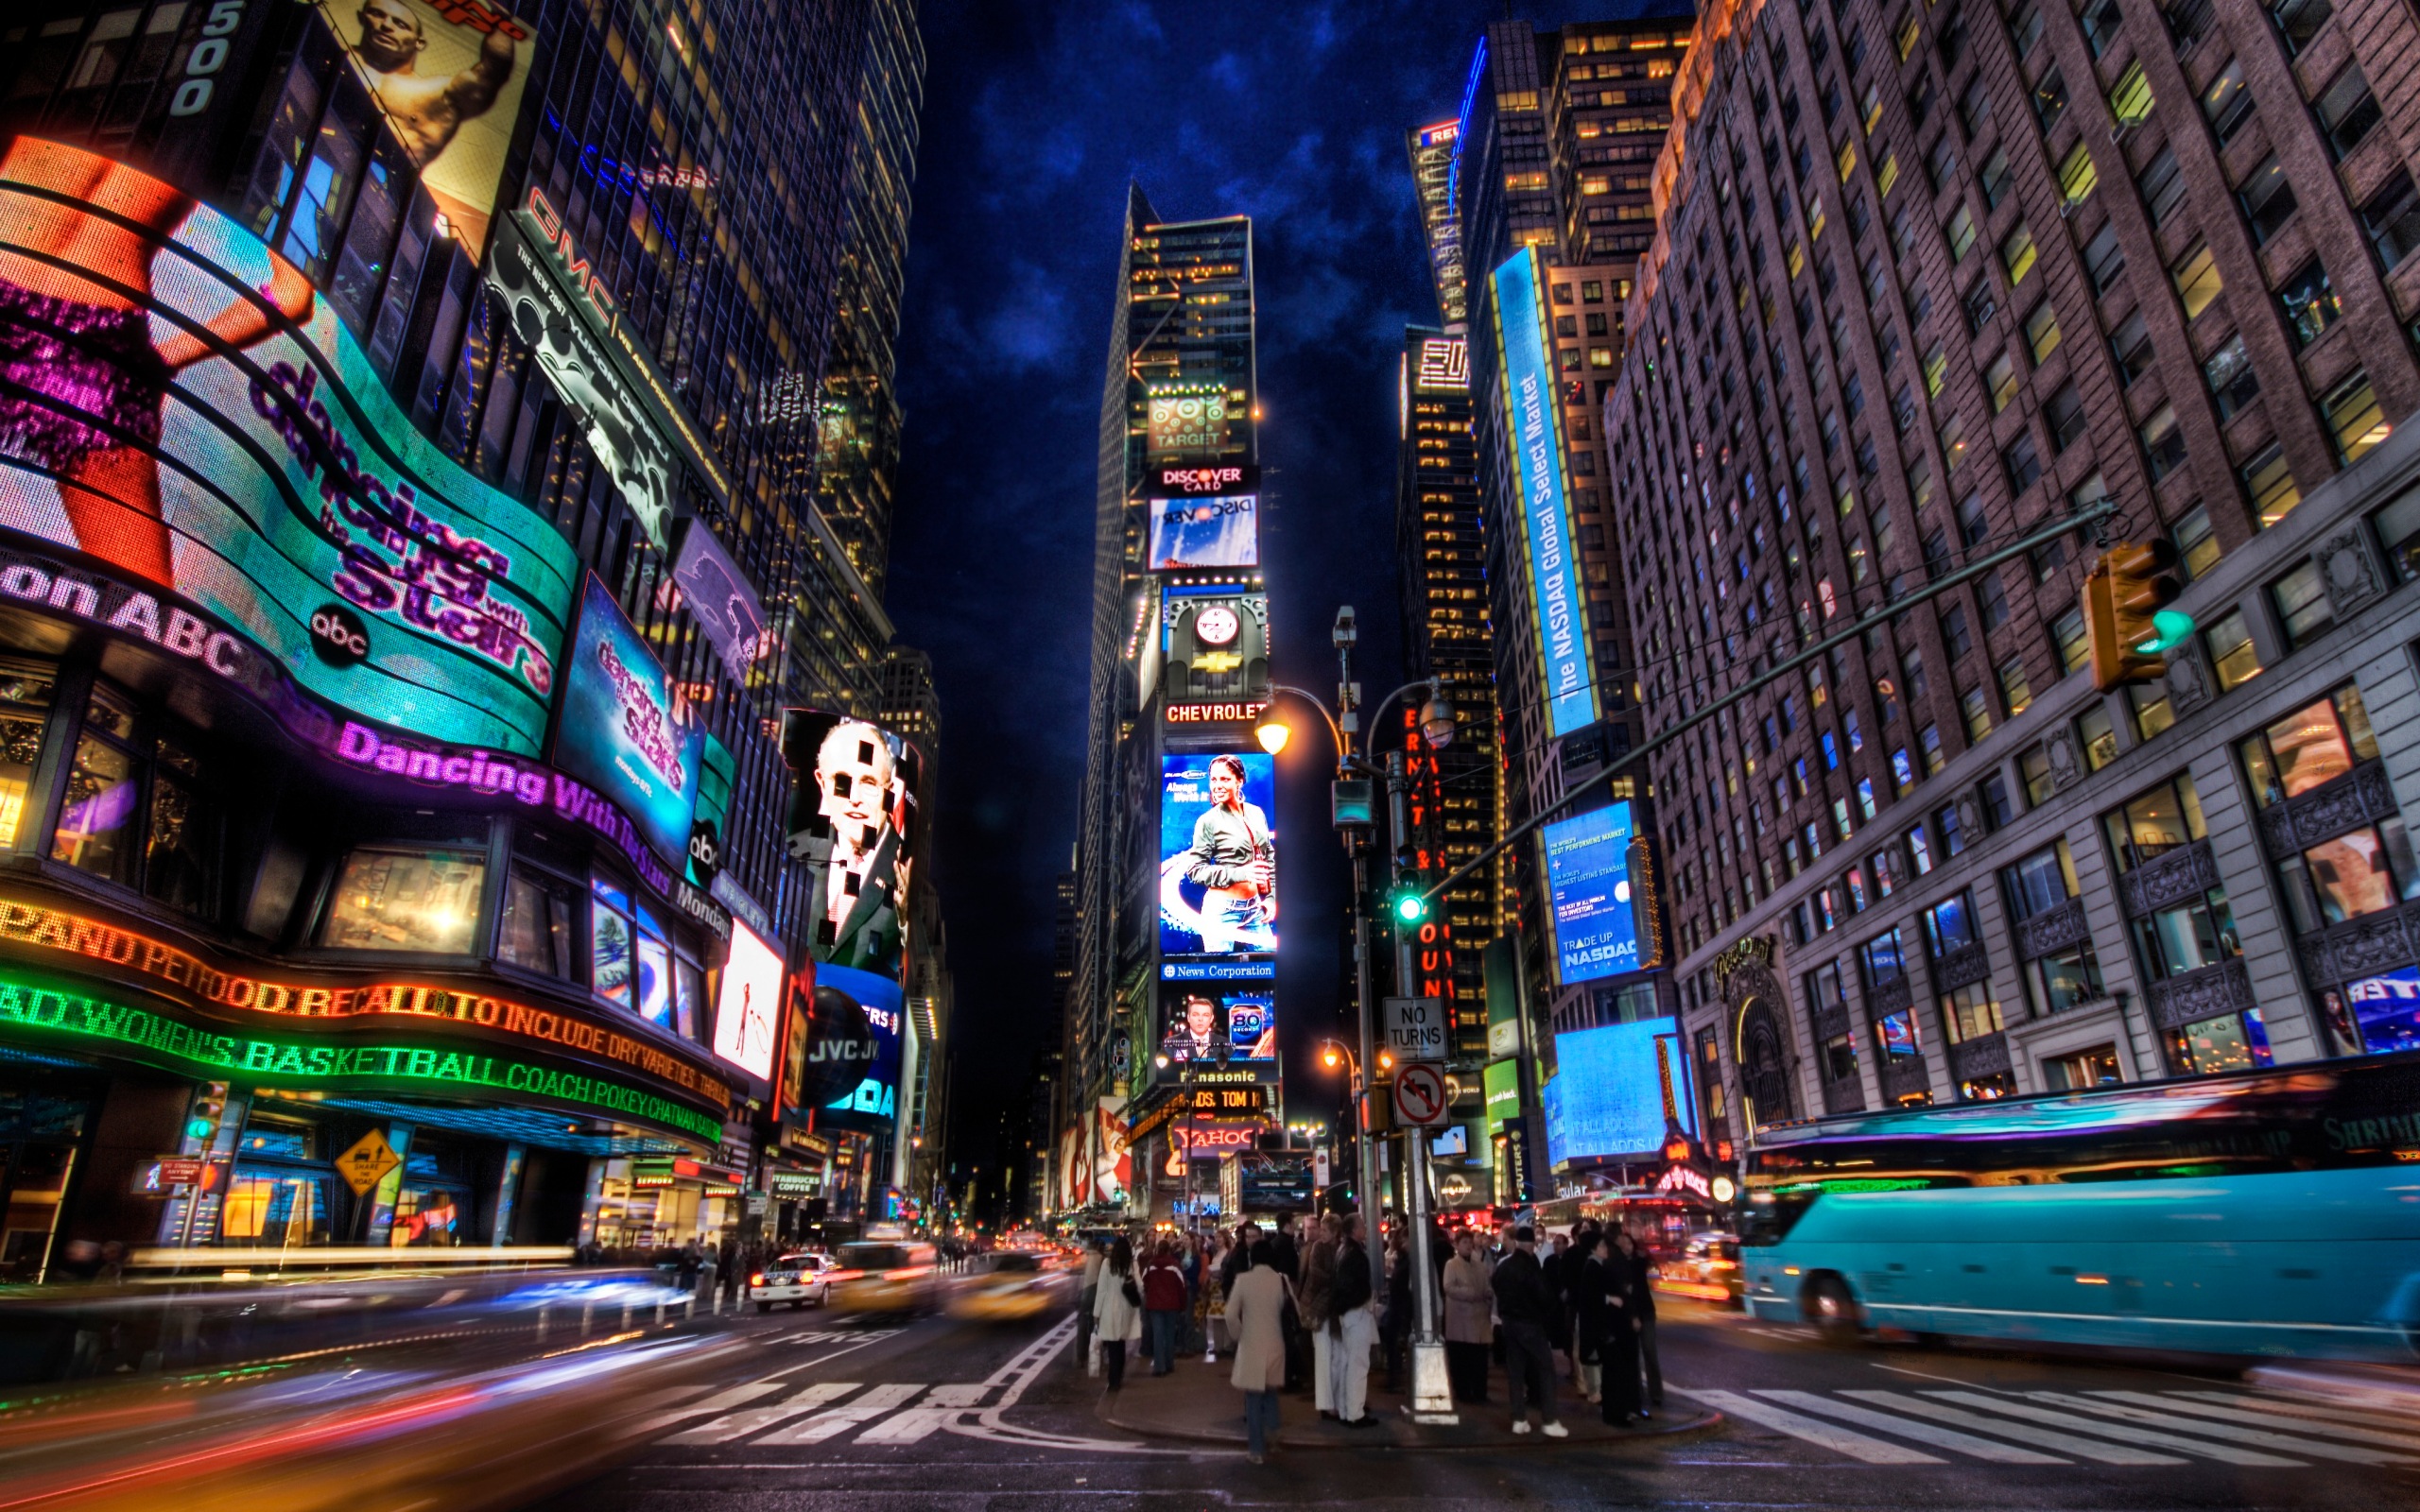 man made, colorful, new york, times square, city, colors, light, night